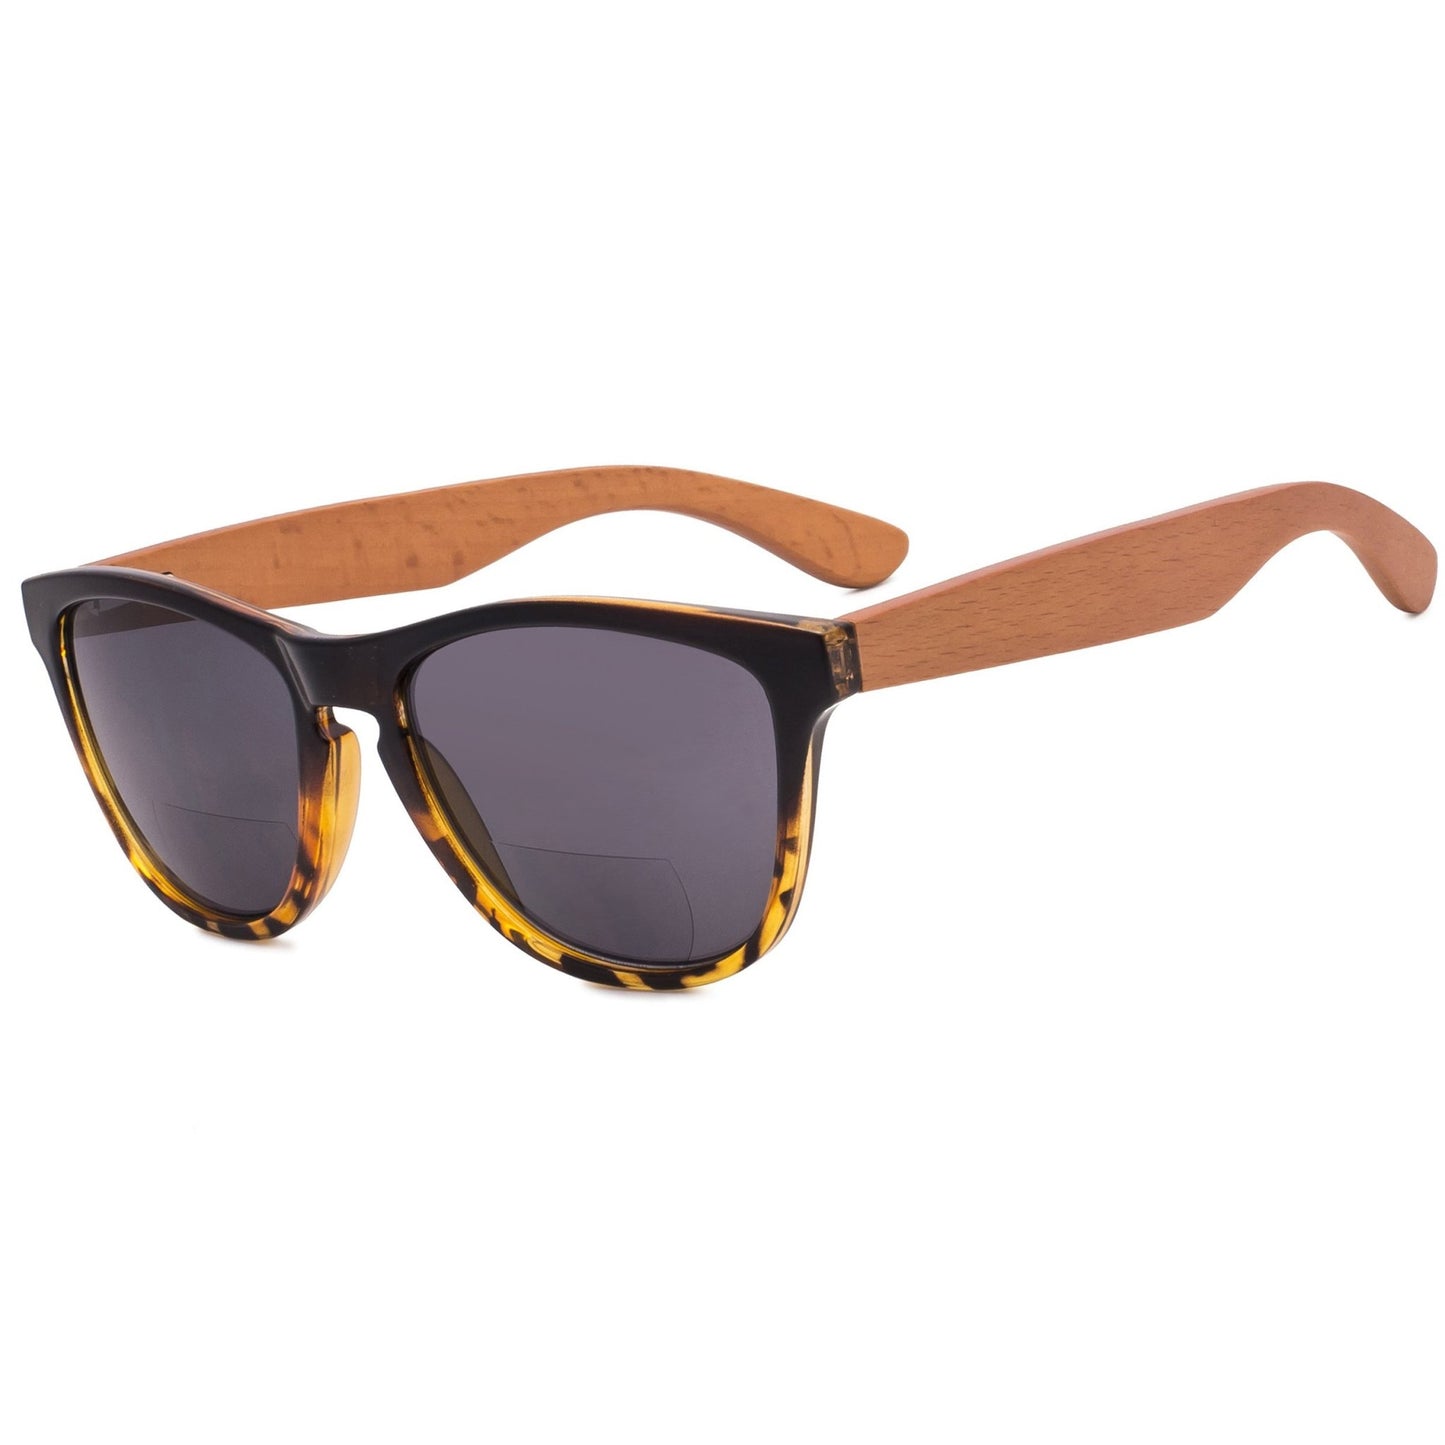 Bifocal Sunglasses with Wood Temples for Women SGH001-6